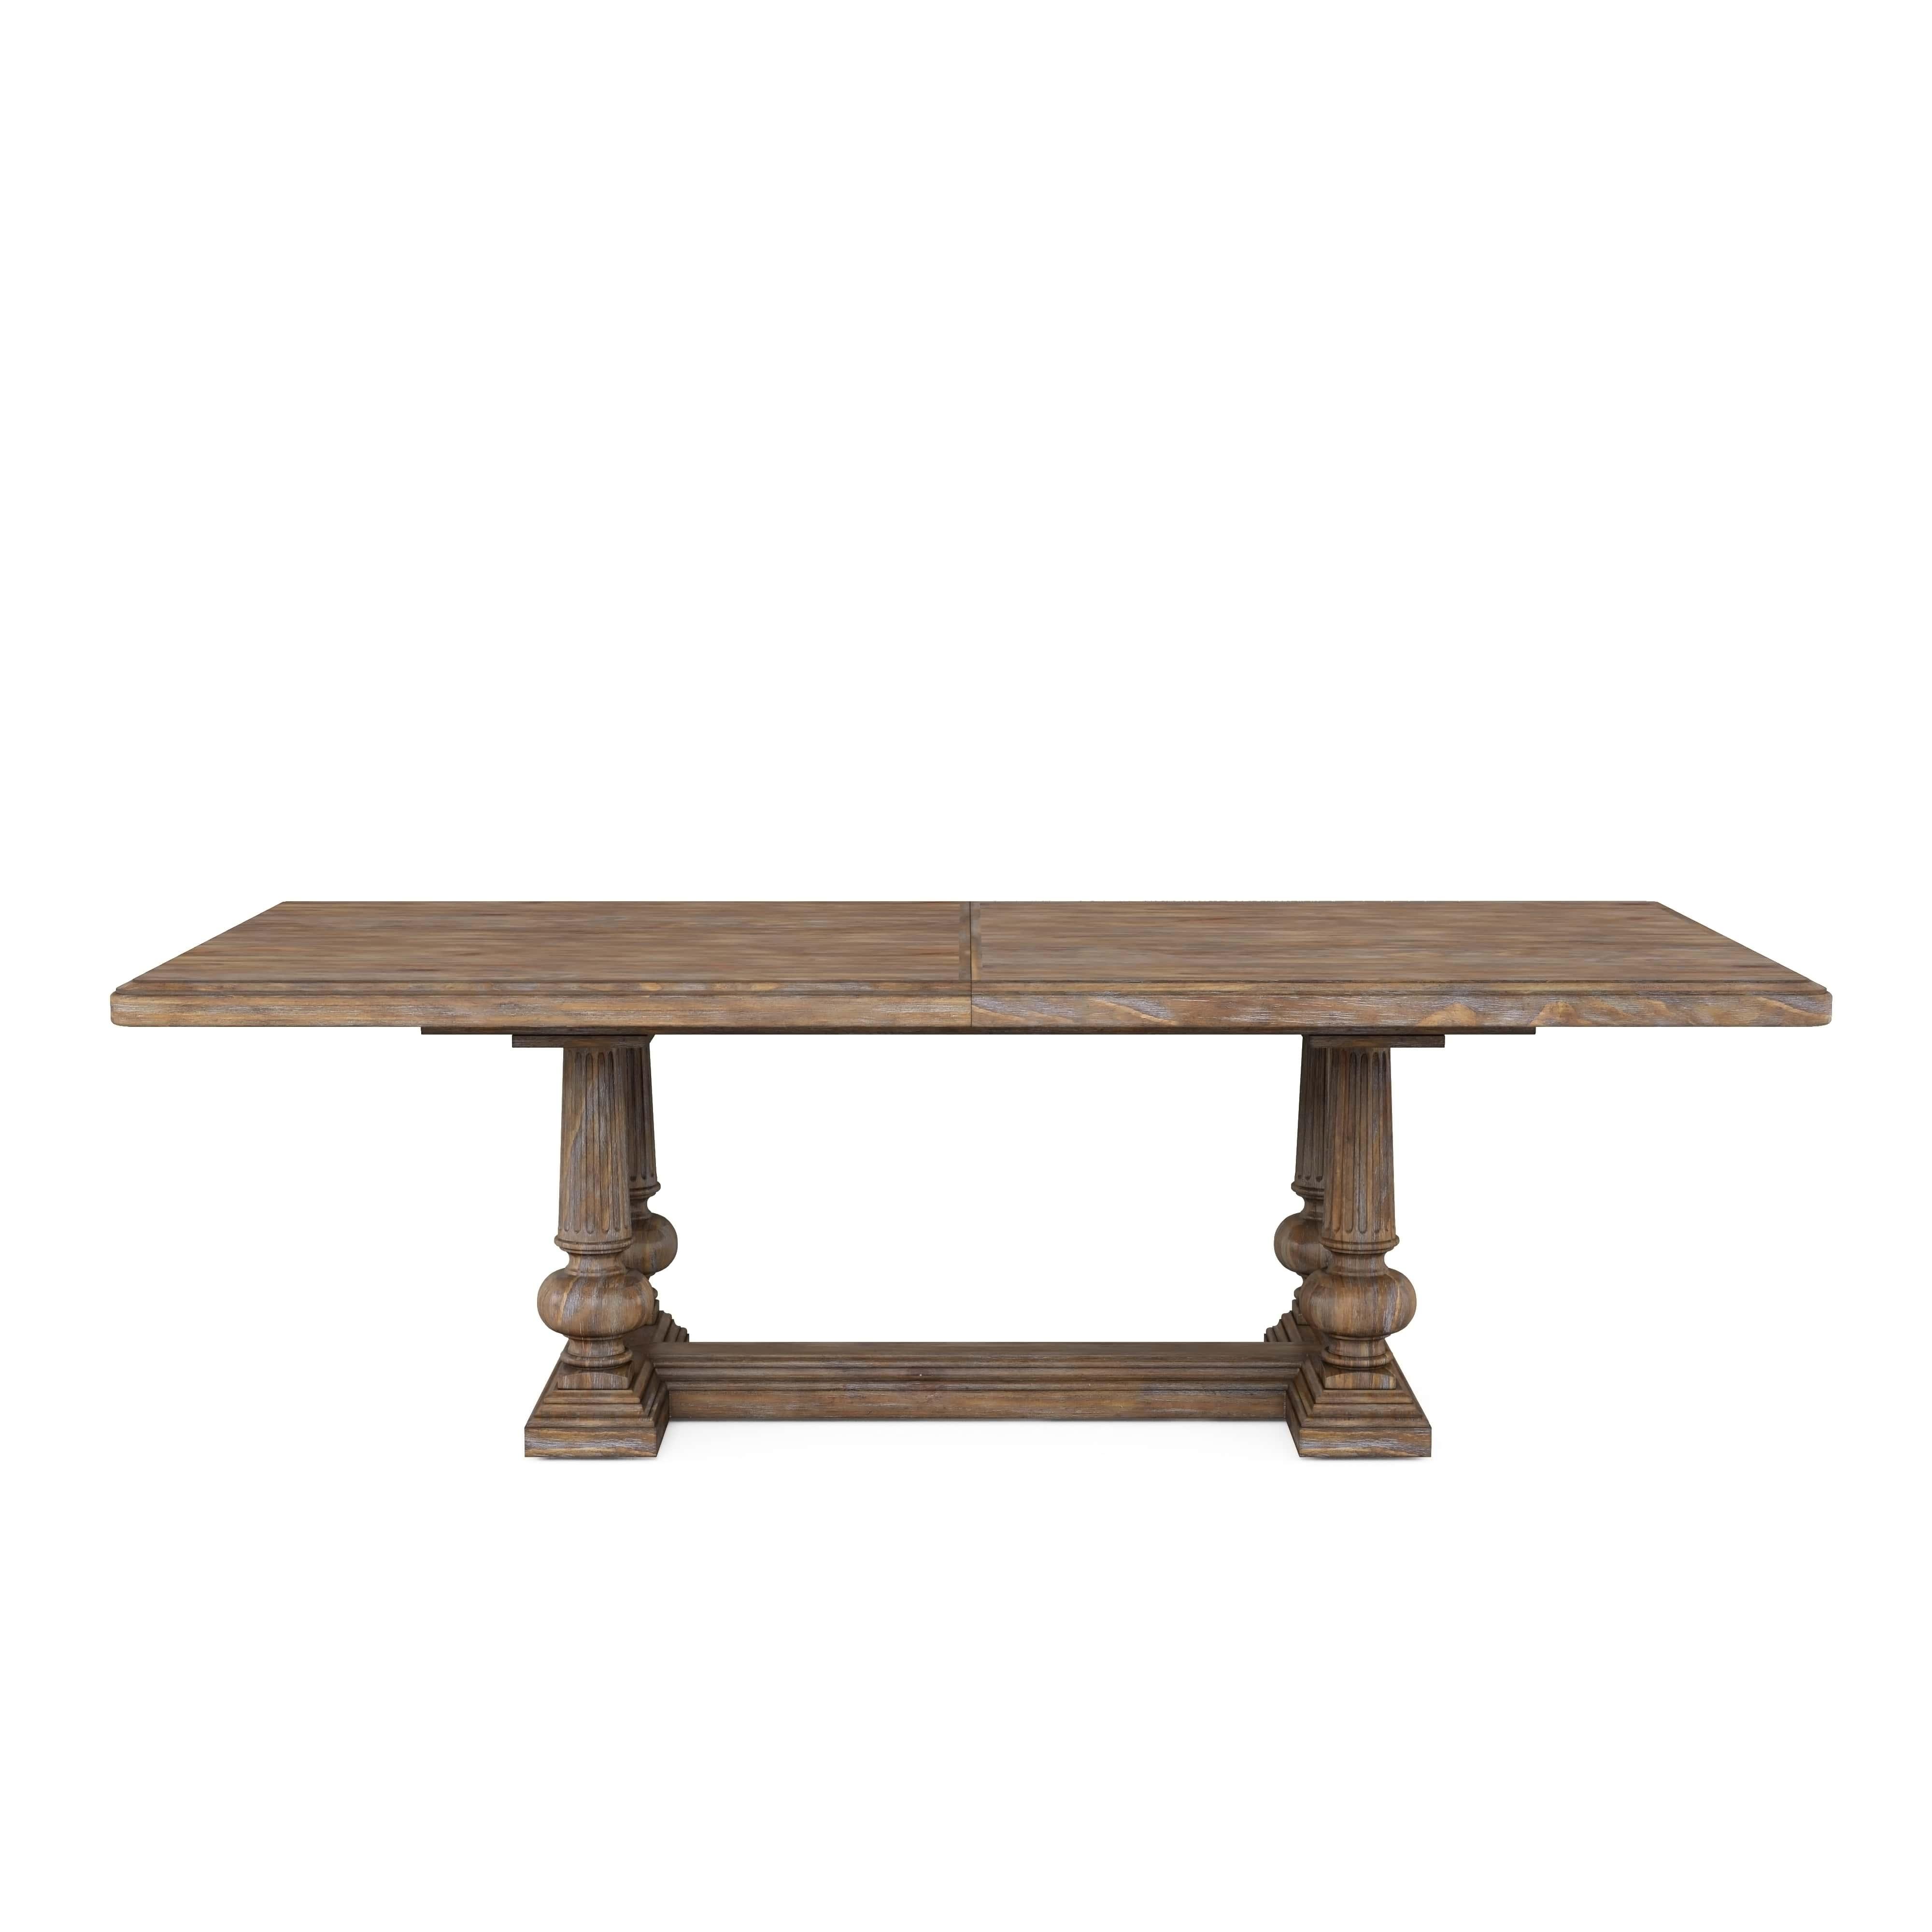 Traditional, Farmhouse Dining Table Architrave 277238-2608 in Brown 